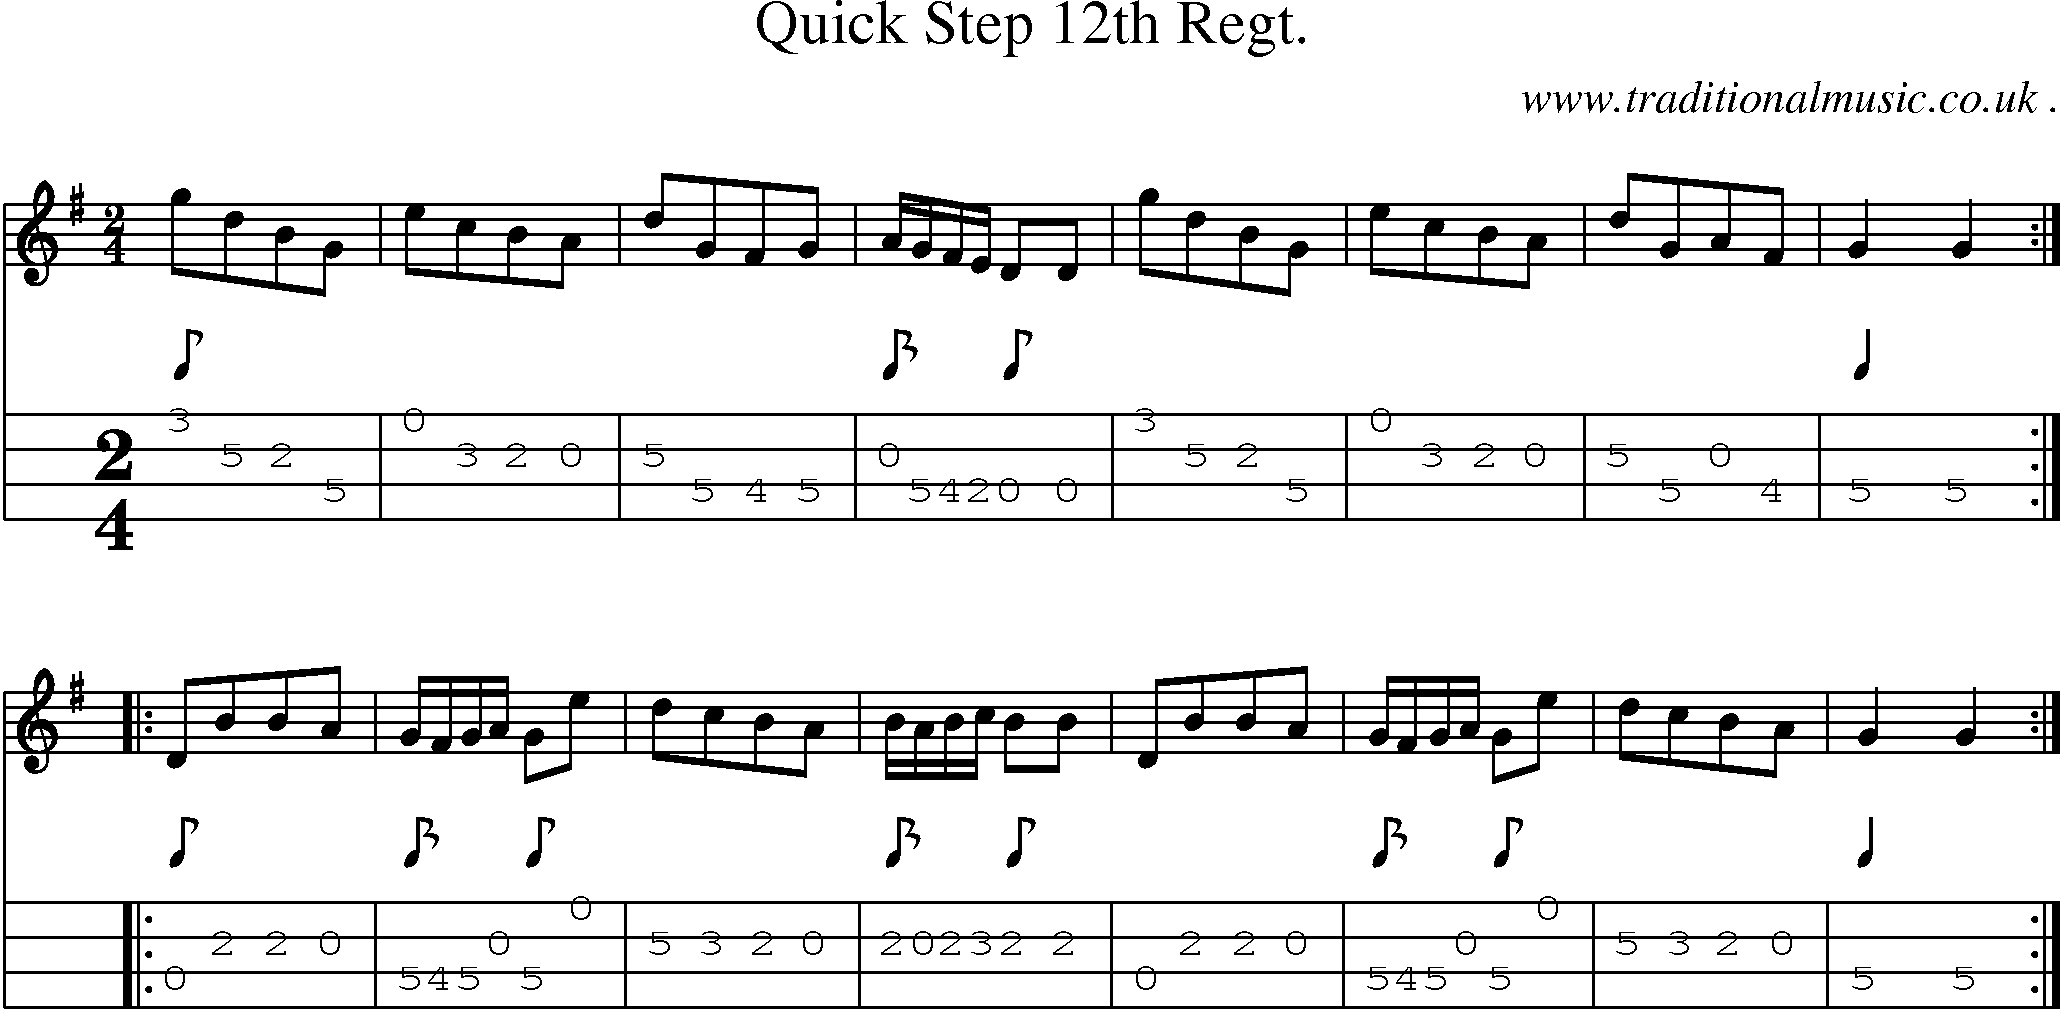 Sheet-music  score, Chords and Mandolin Tabs for Quick Step 12th Regt